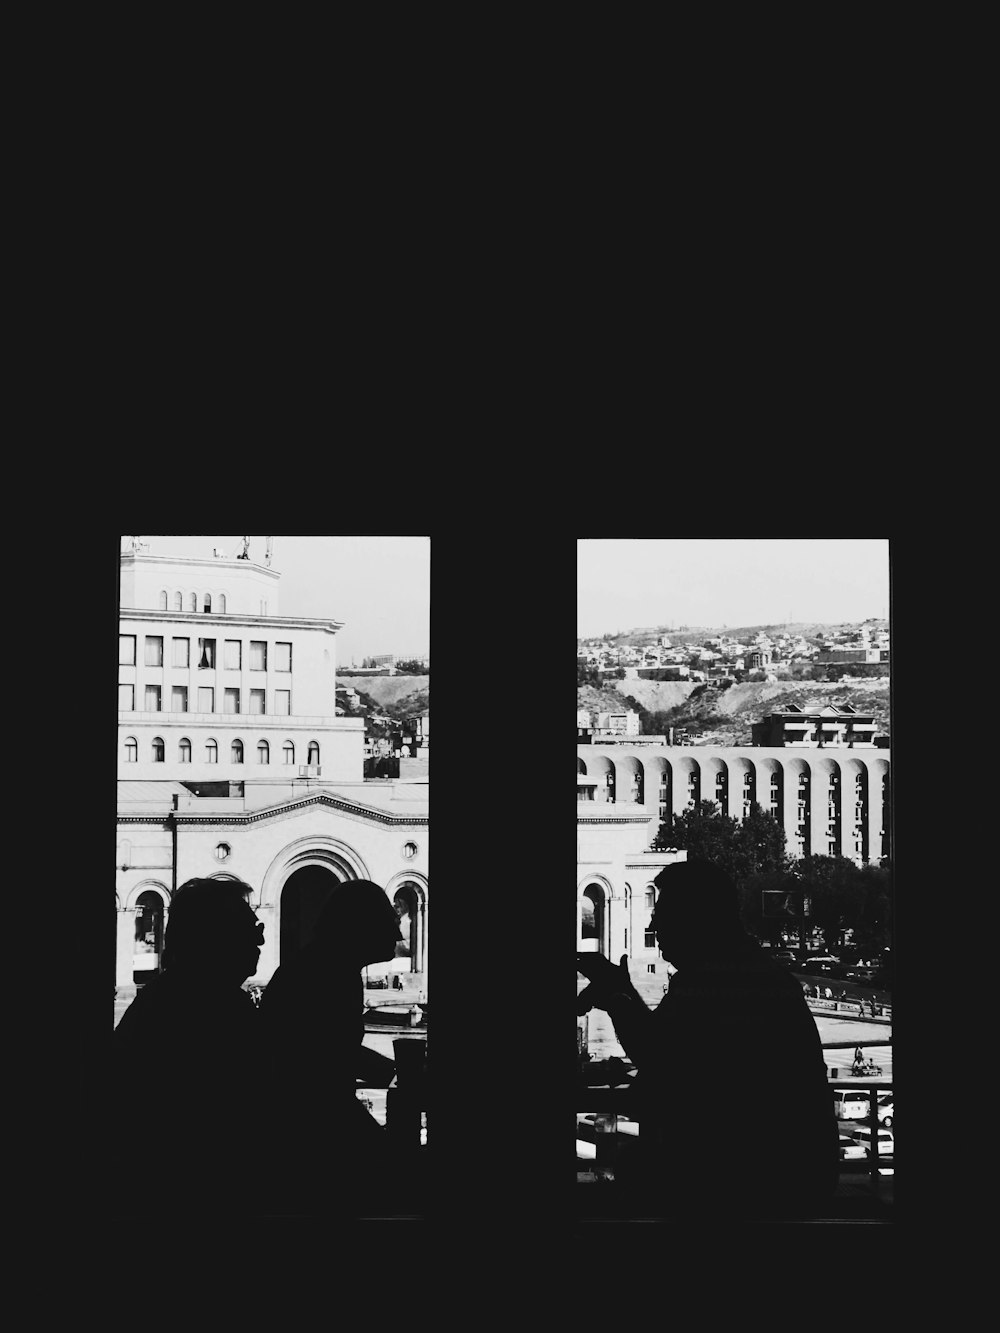 silhouette of people inside building